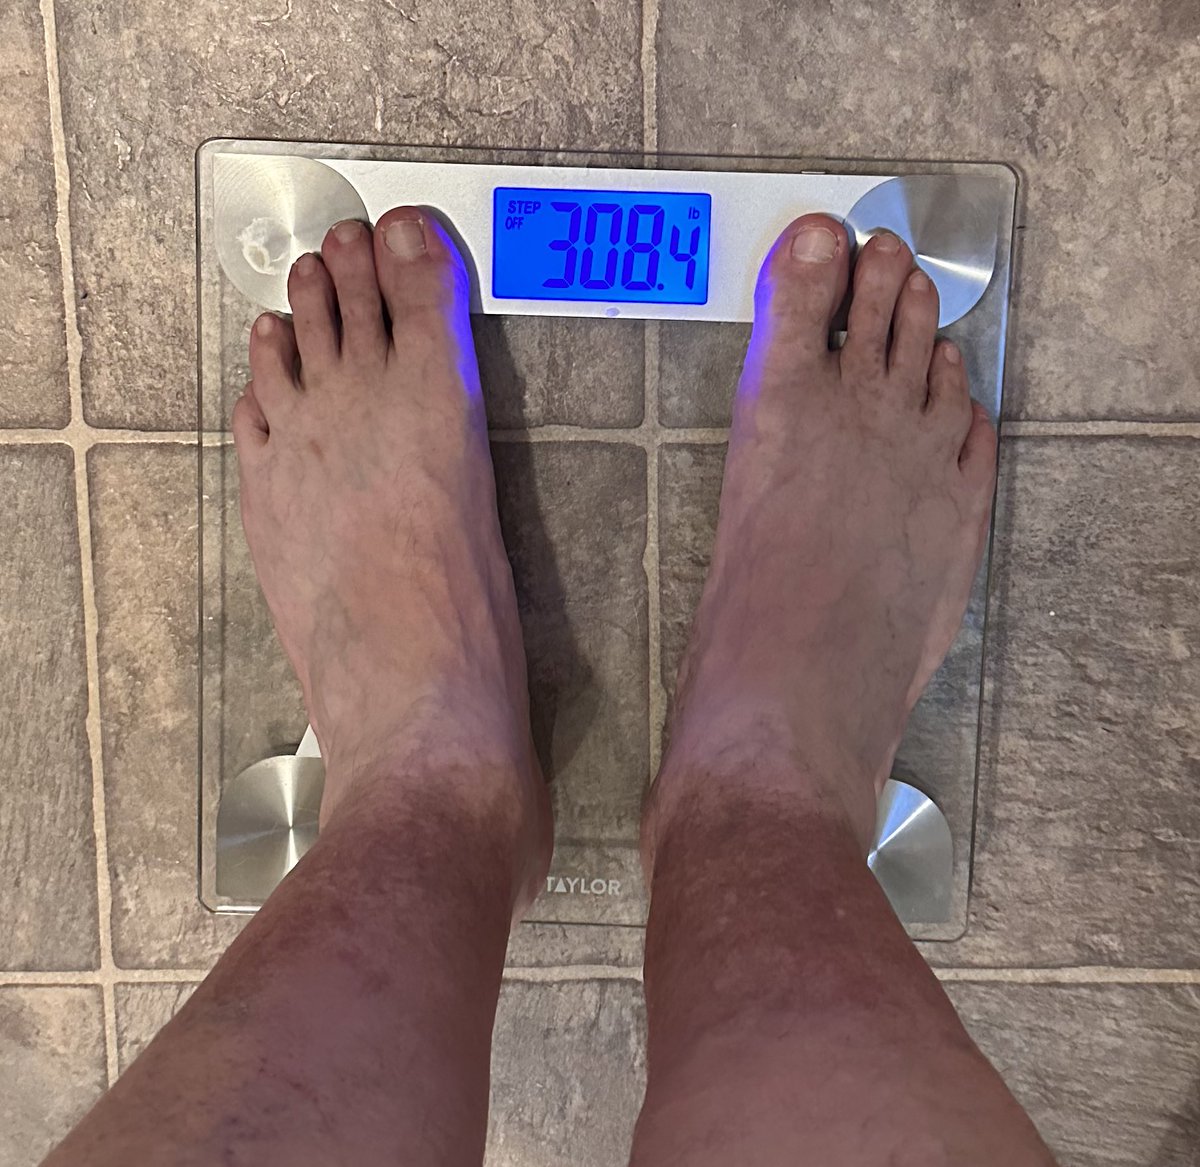 It’s Hump Day so we know that’s also #weighinwednesday too! I was expecting to be a bit heavier today, but I’ll take 308 all day! #weightloss #killingobesity #RevolutionOfEric